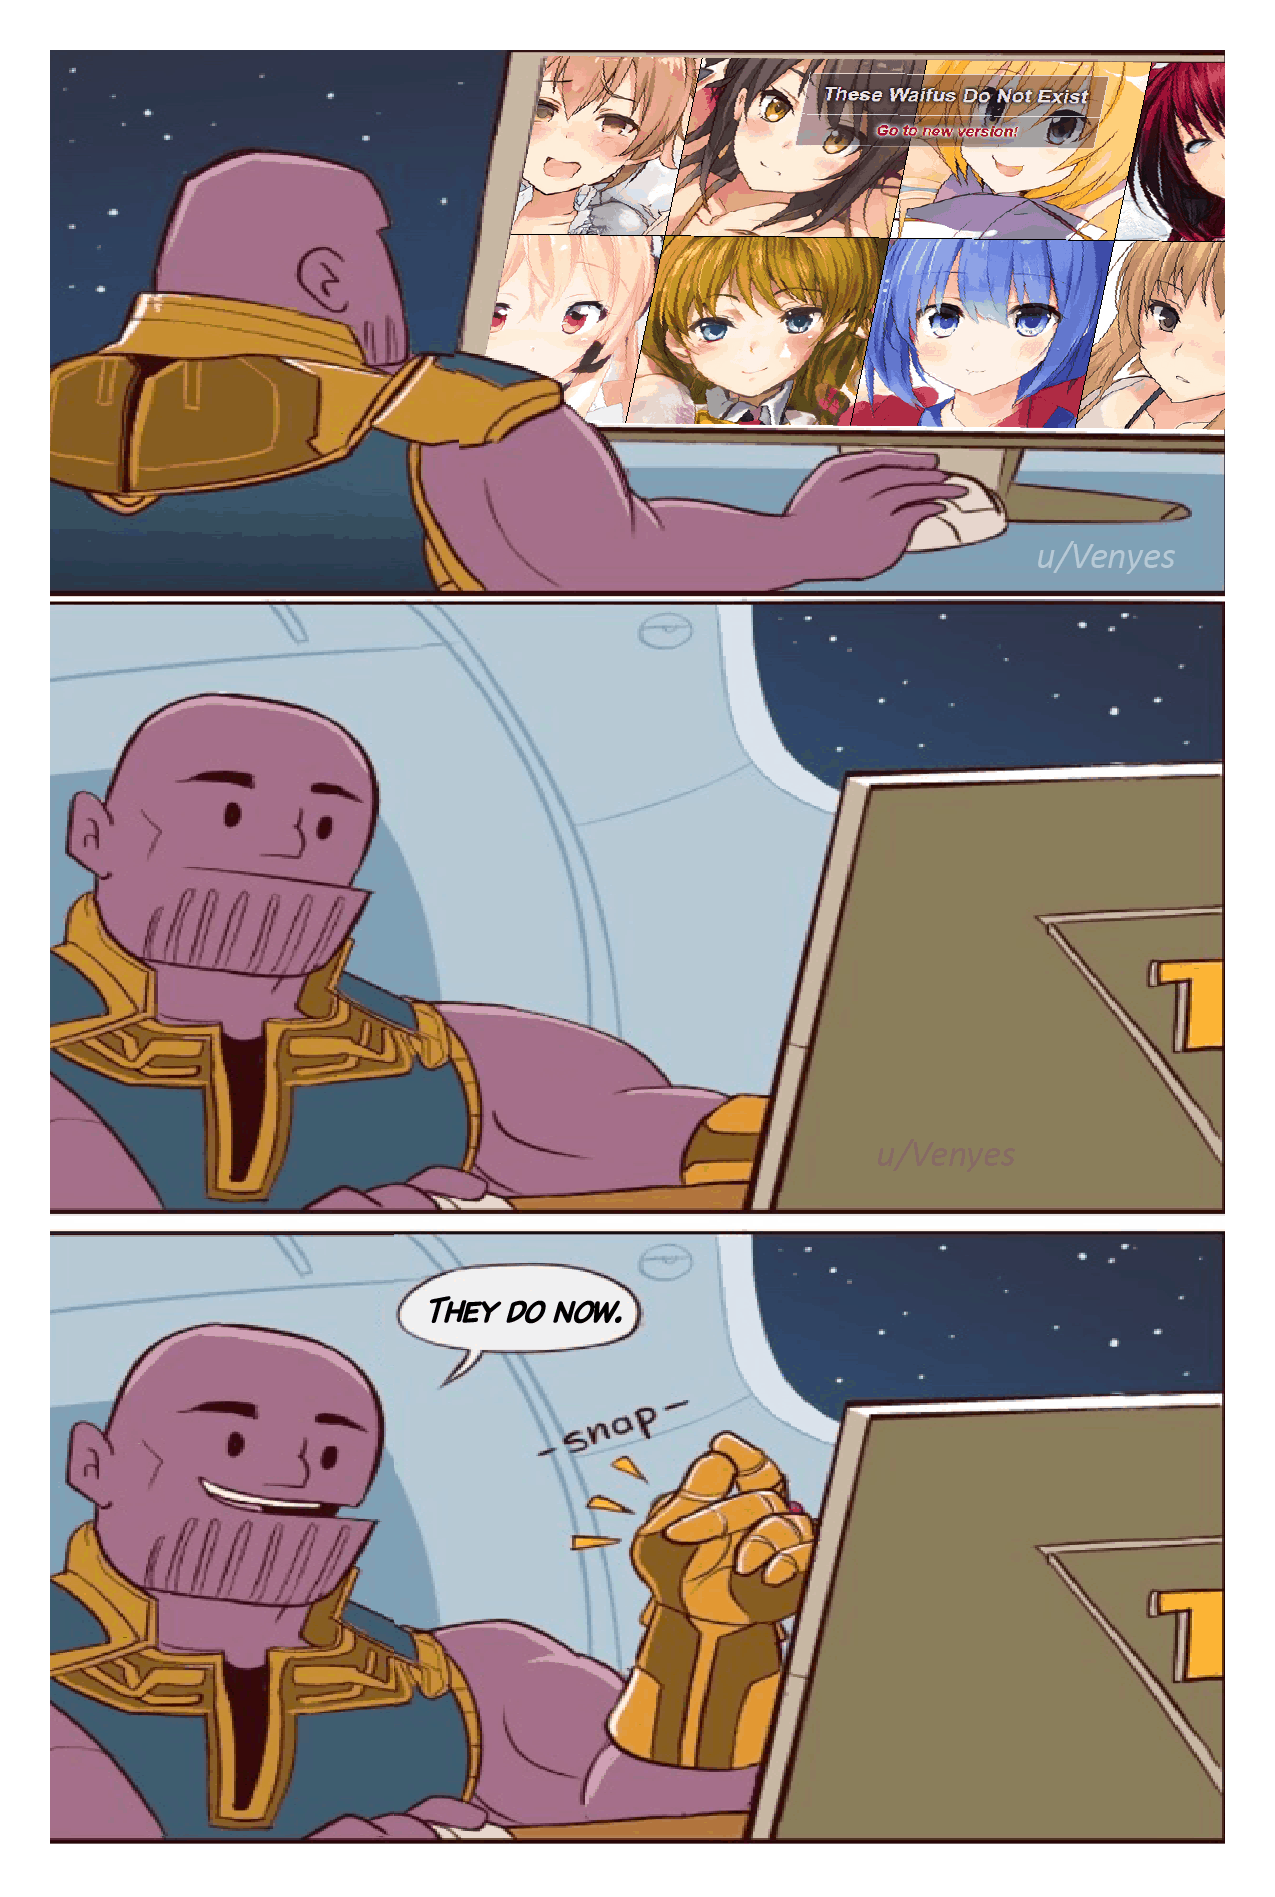 “Reality can be whatever he wants.” —Venyes [Thanos meme about “These Waifus Do Not Exist”]